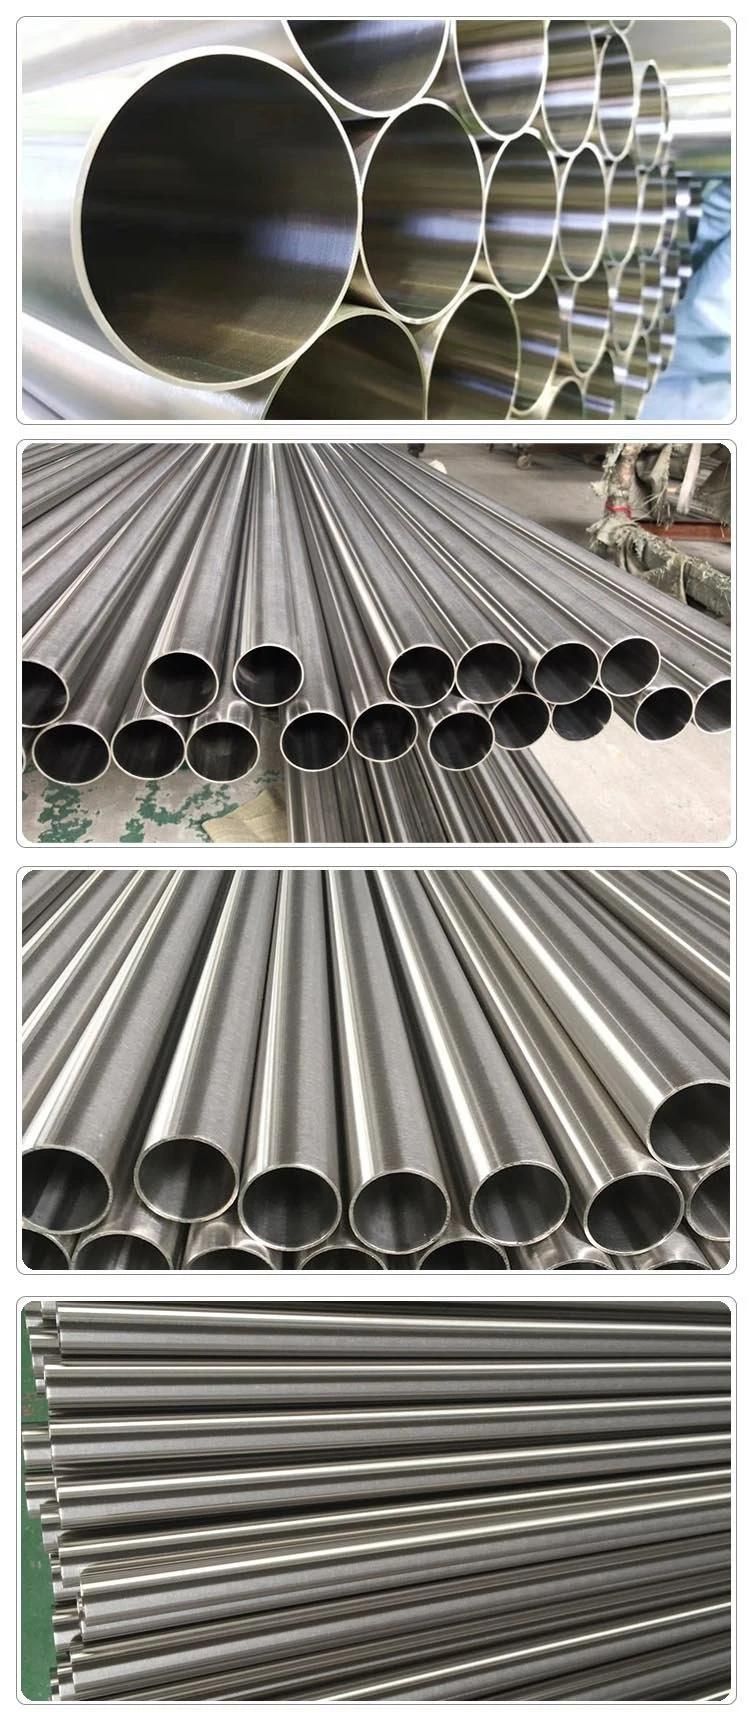 Polishing/Drawing Welded Seamless Stainless Steel Pipe